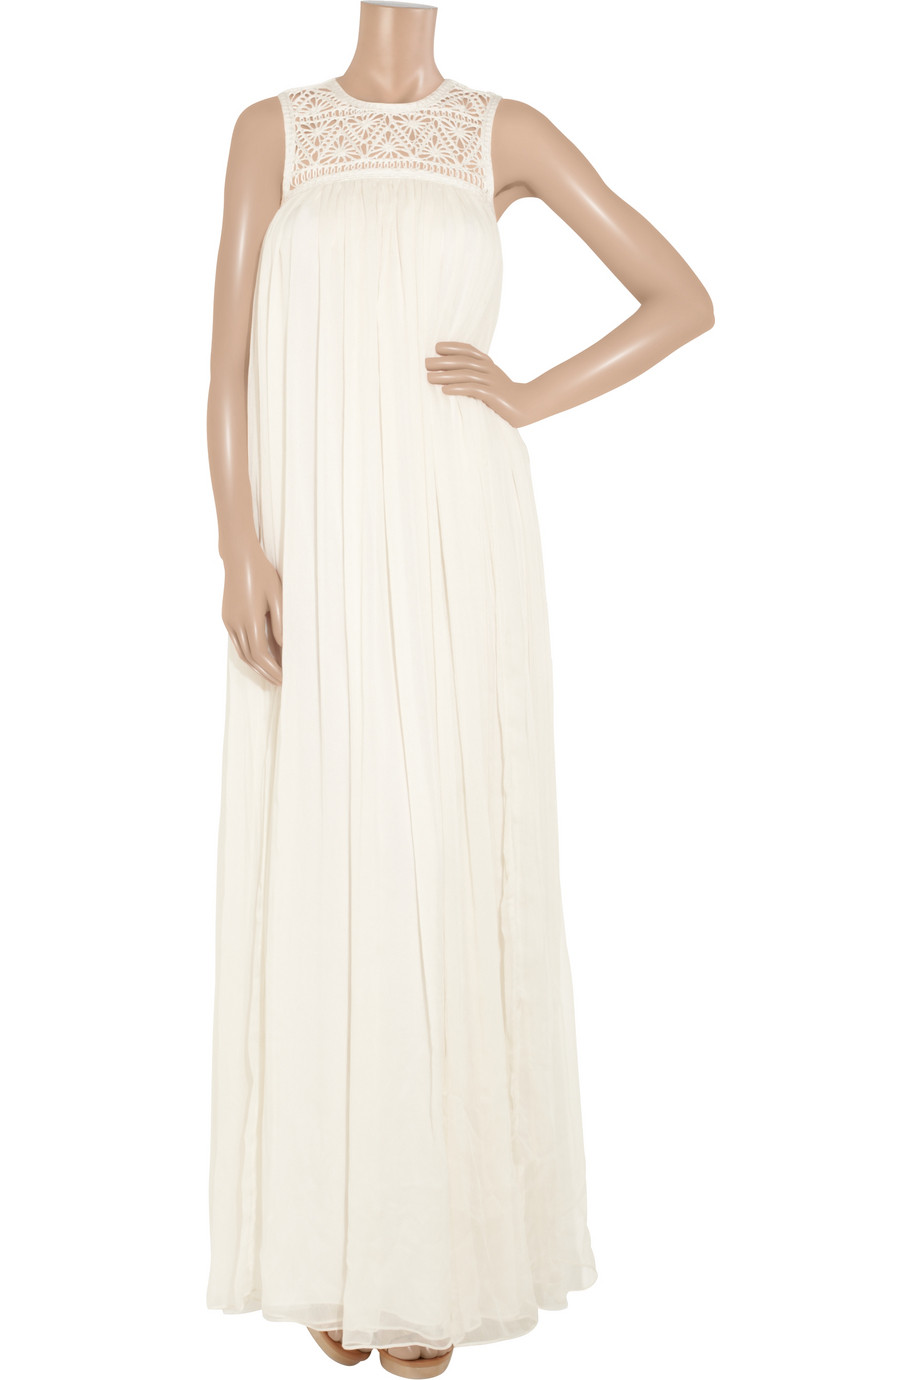 Adam lippes Crocheted Lace and Silk-chiffon Maxi Dress in White | Lyst